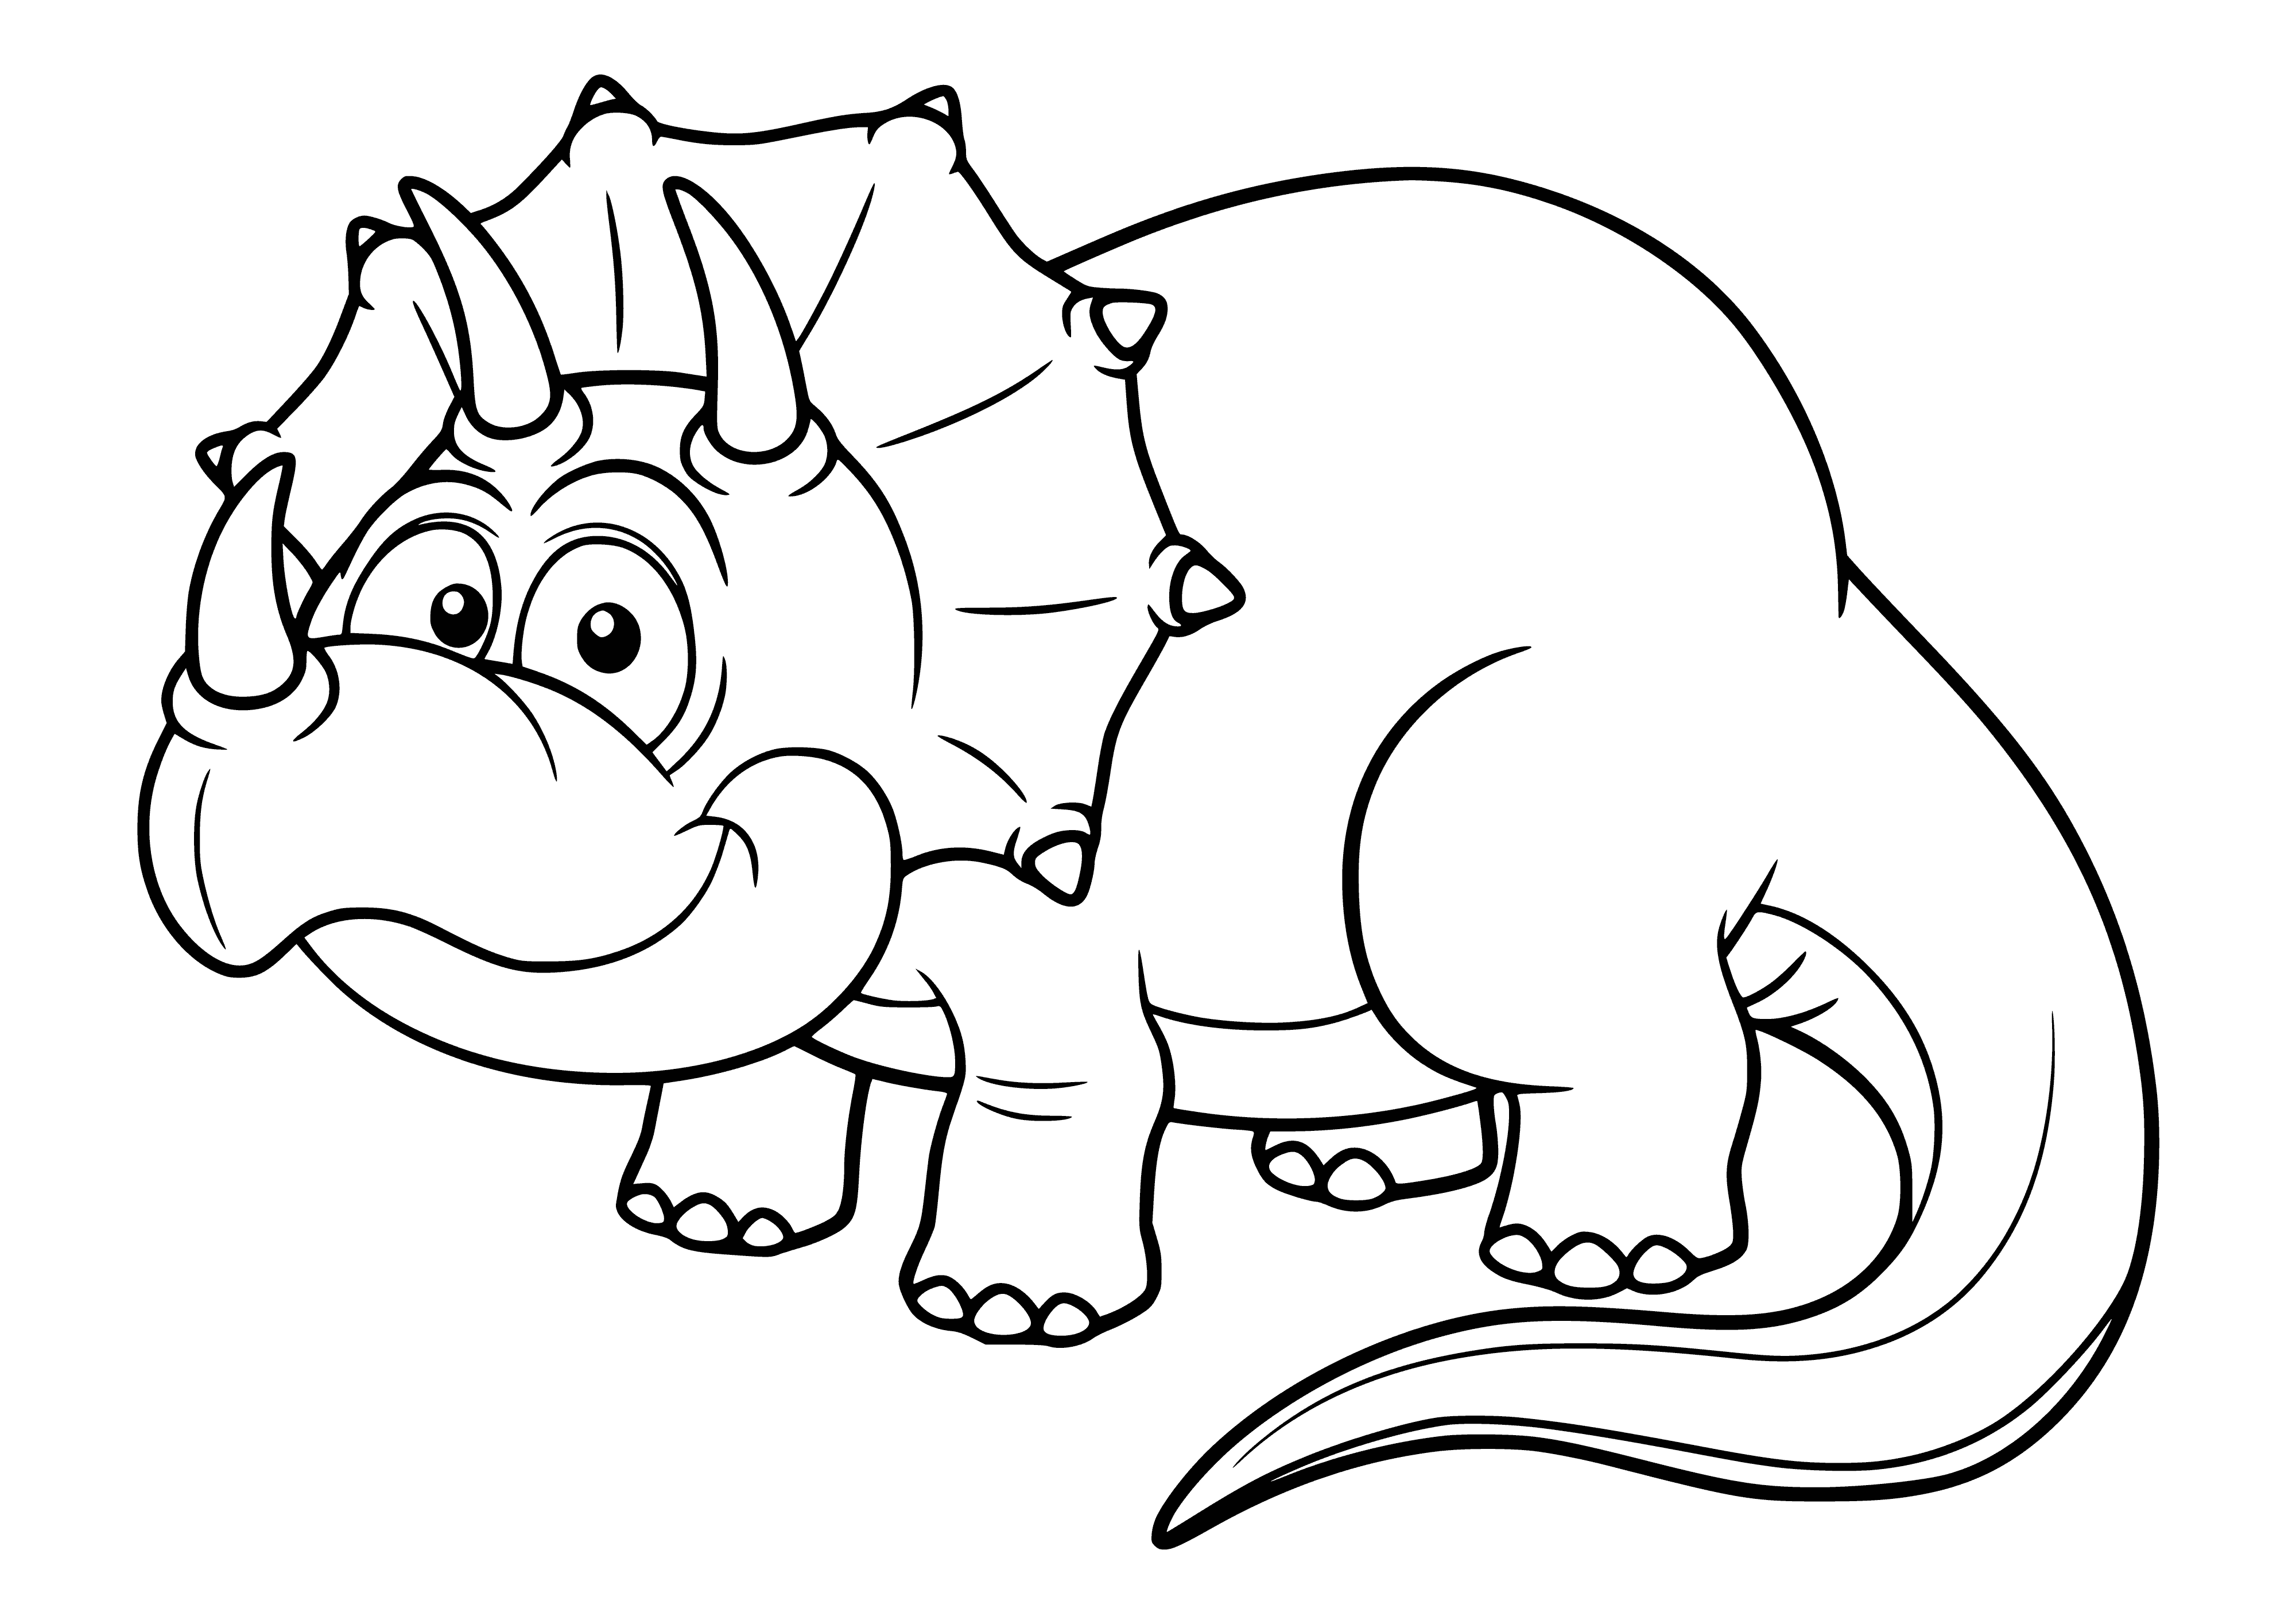 coloring page: A triceratops with a large head, three horns, a frill, long tail, and white spots colored brown stands on all fours.